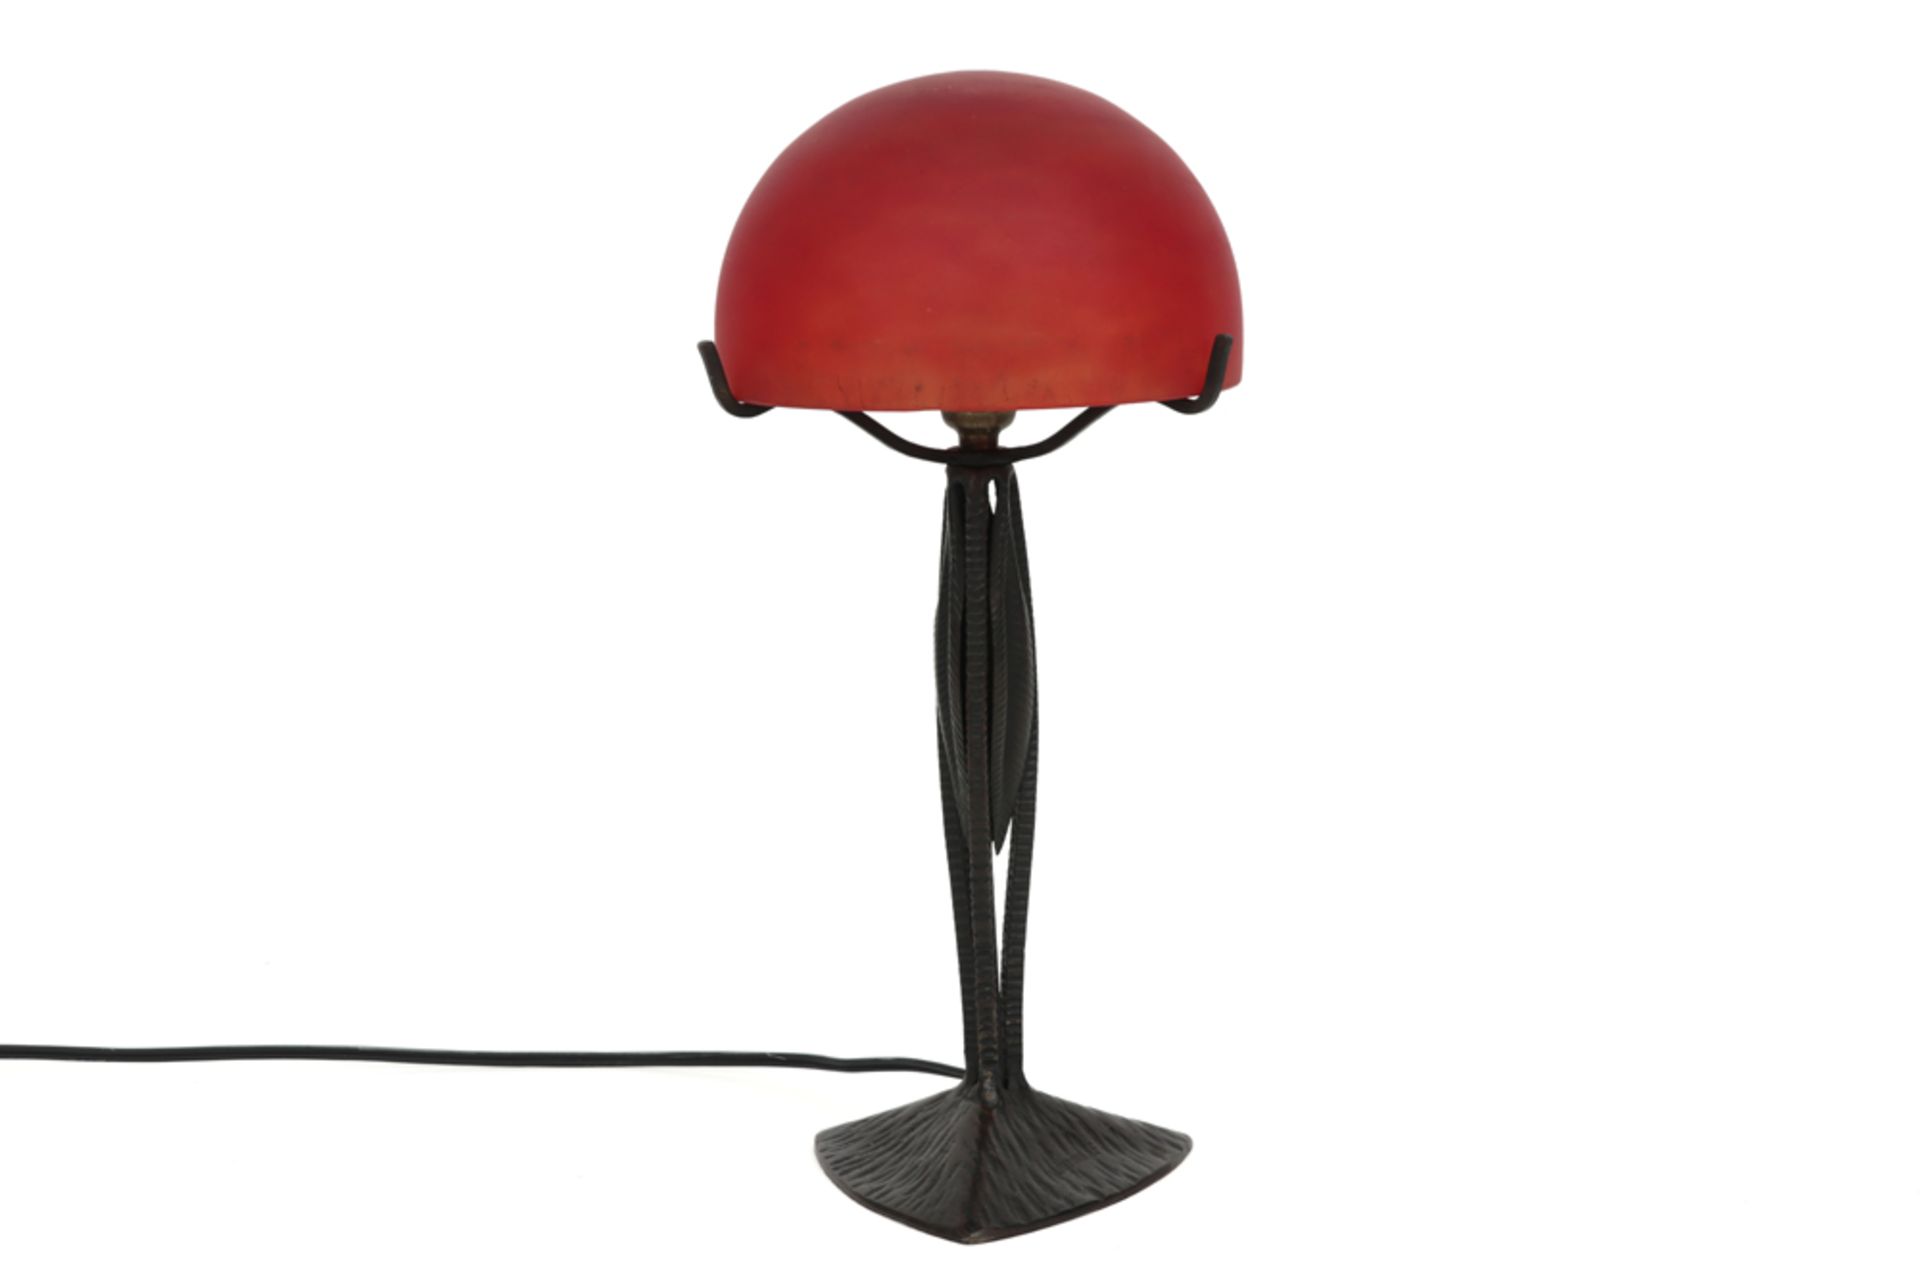 Le Fer forgé H.F. marked Art Deco lamp in wrought iron and with red glass shade